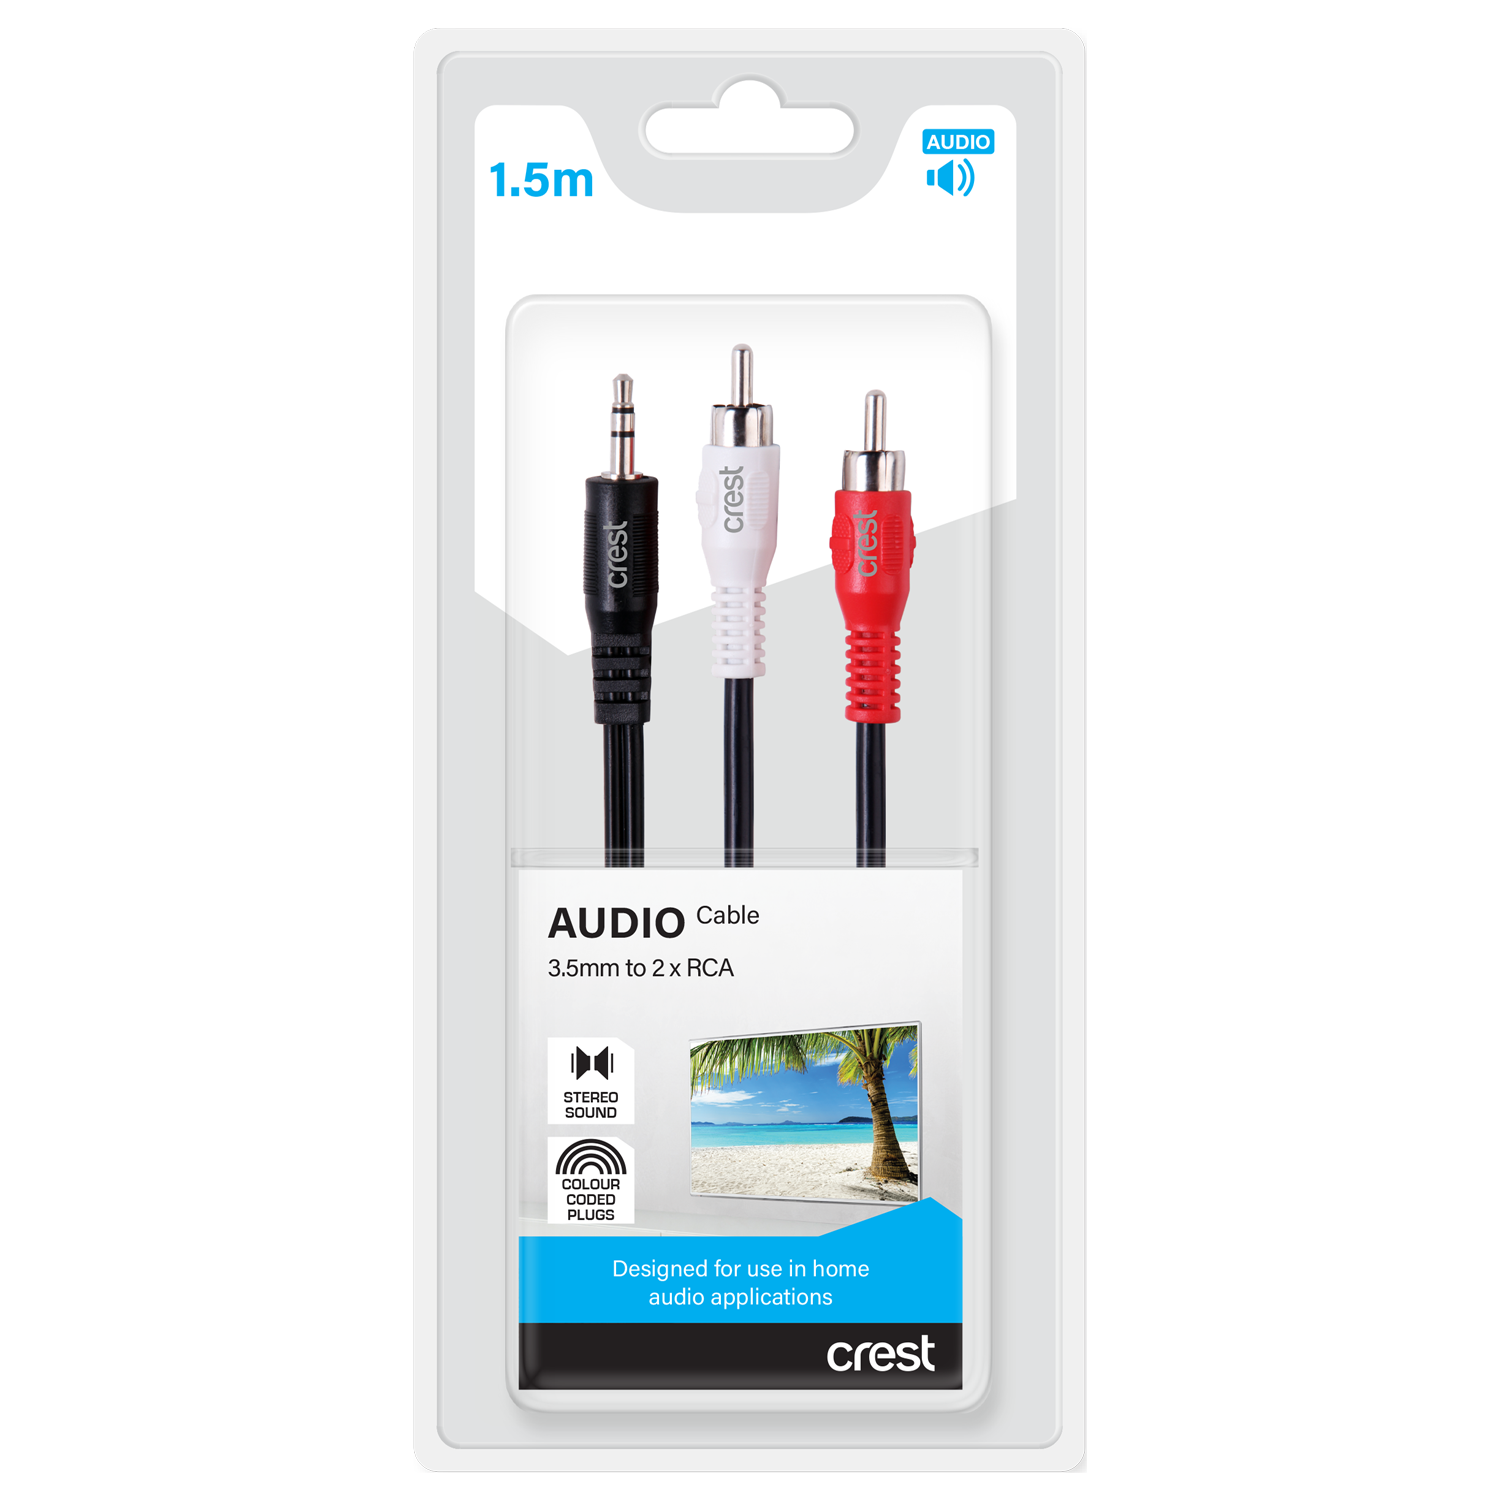 Stereo Audio Cable 3.5mm Plug To 2 x RCA Plugs 1.5M